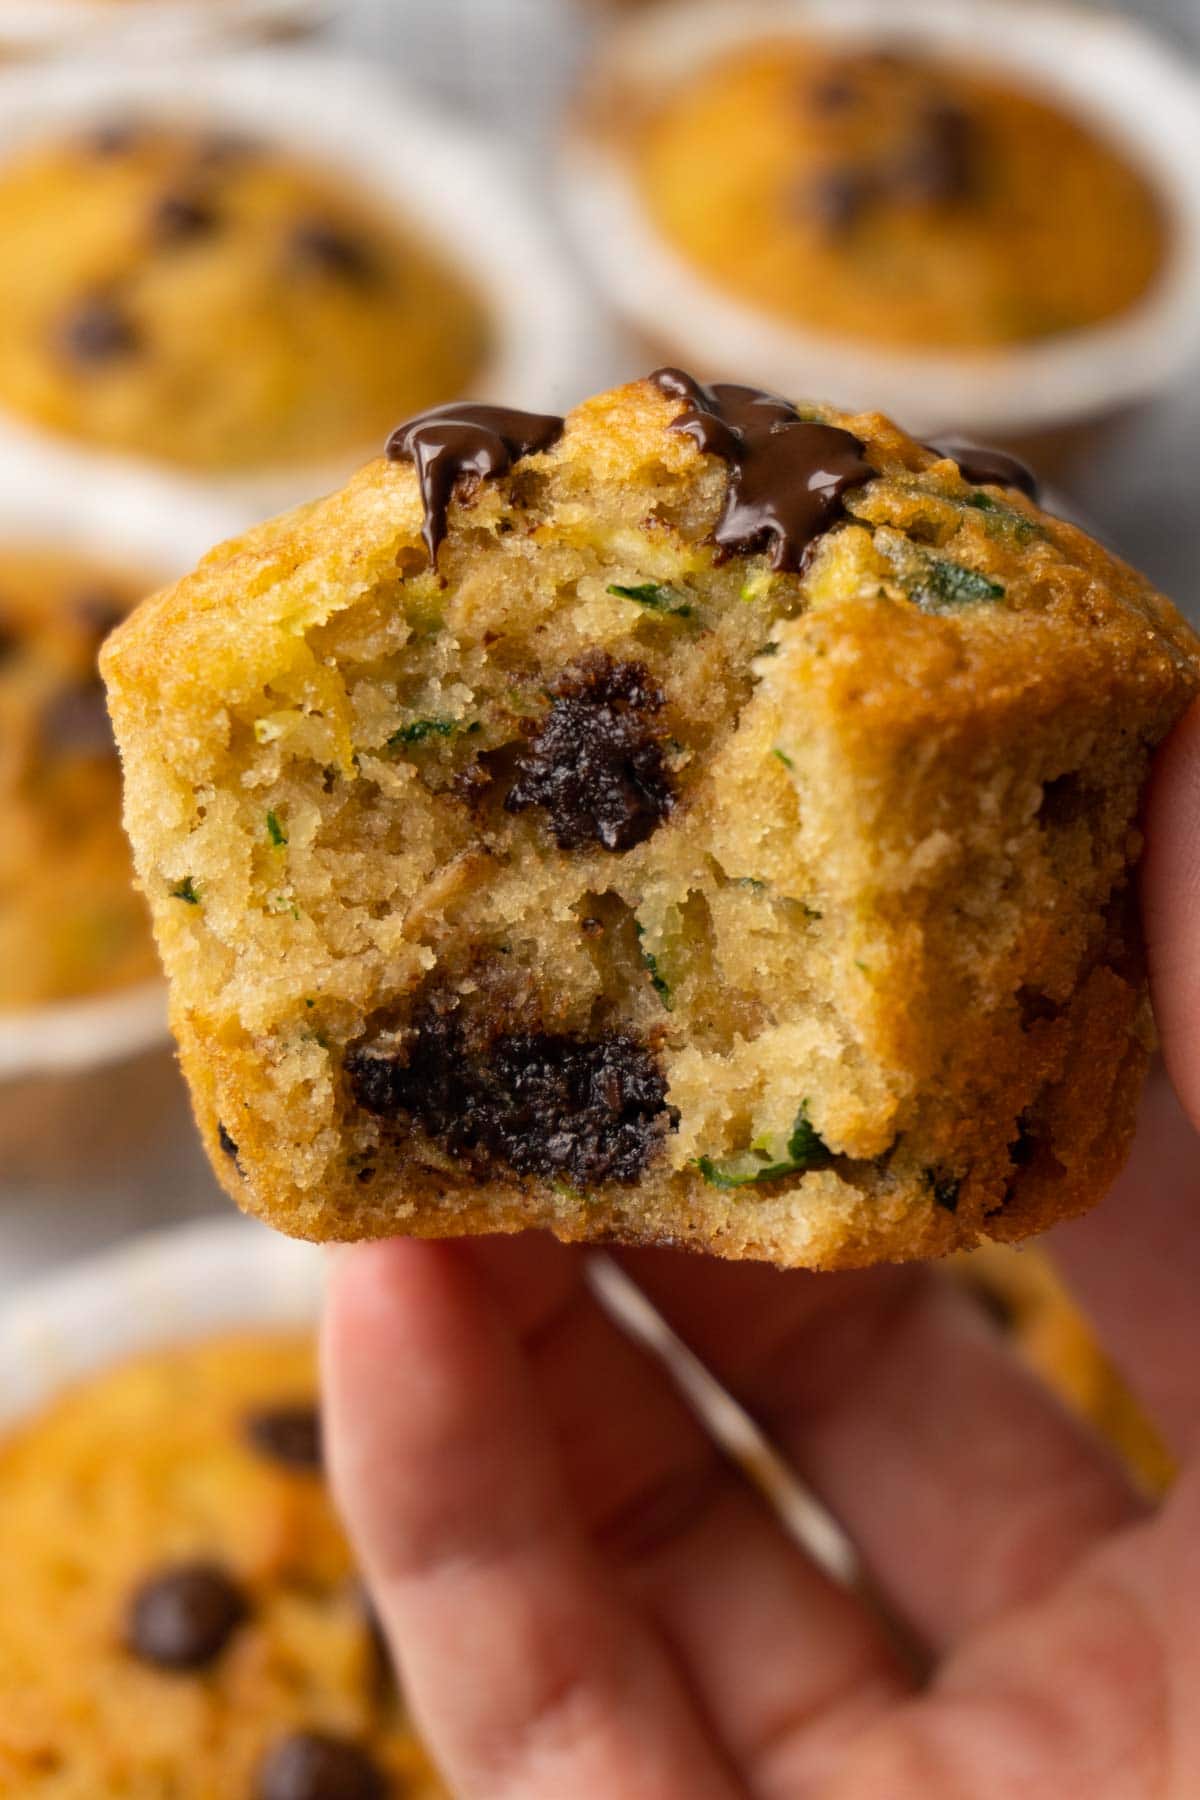 A hand is holding a muffin with chocolate chips and grated zucchini; one bite is taken.